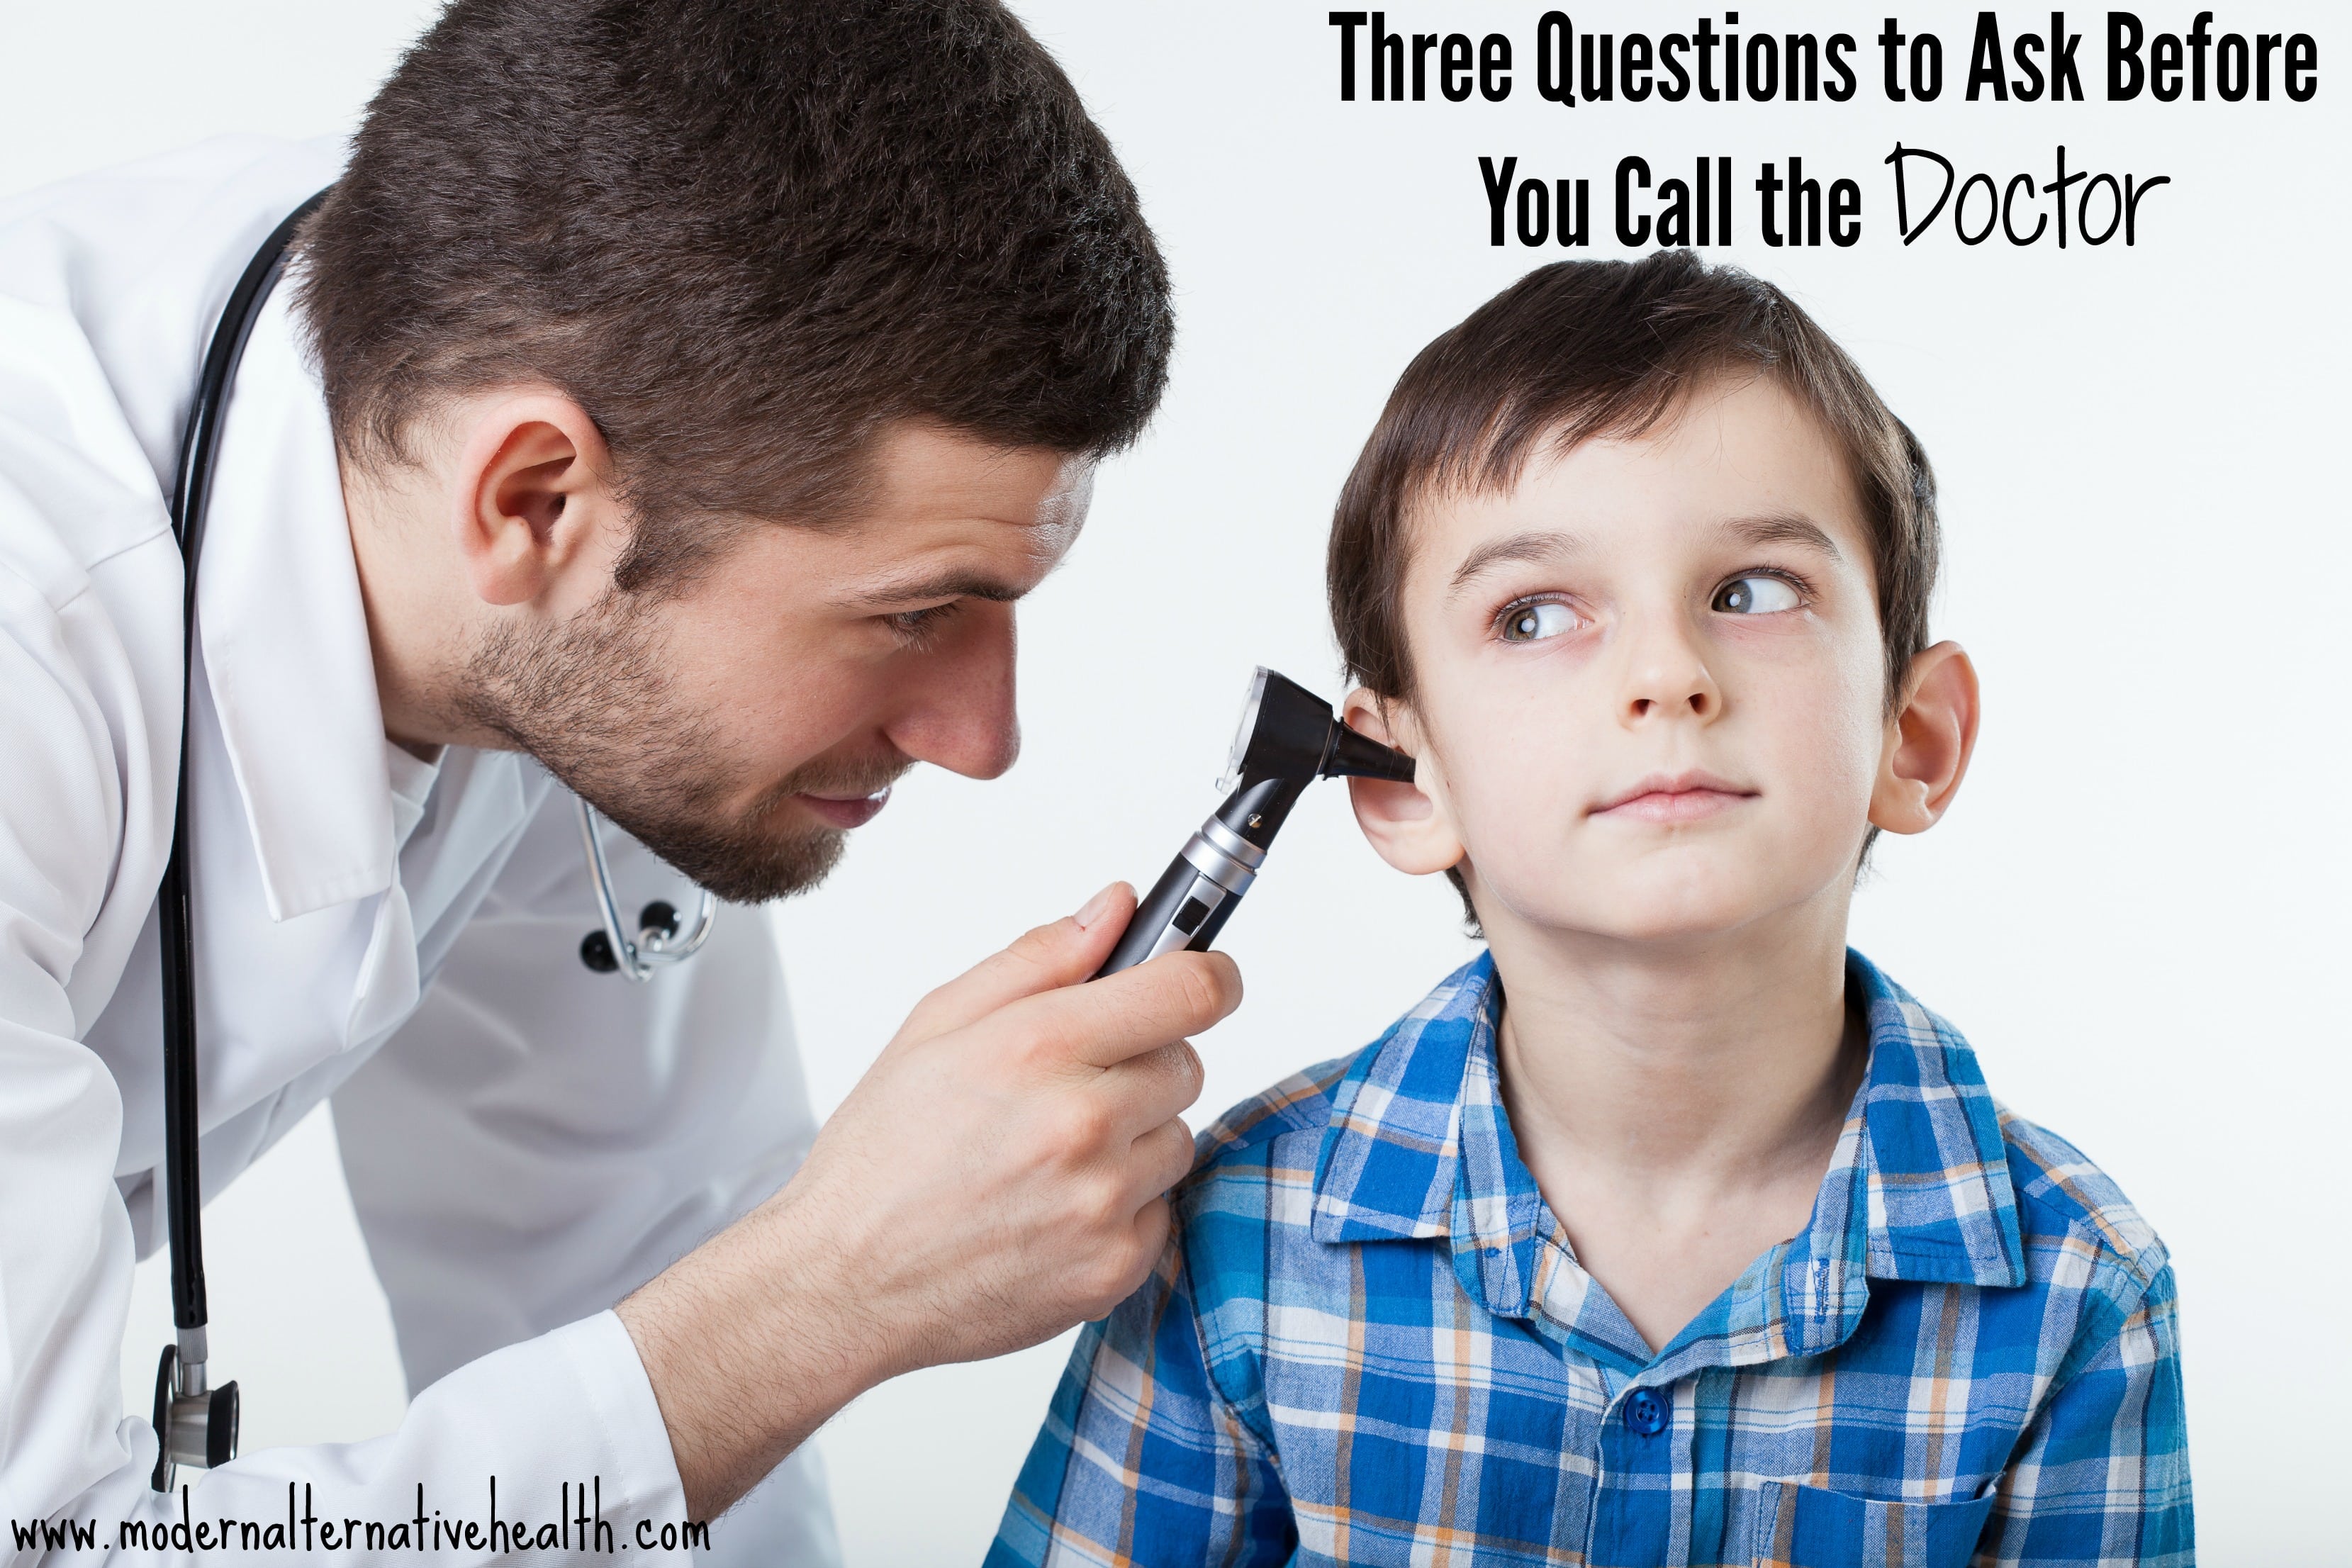 Three Questions to Ask Before You Call the Doctor